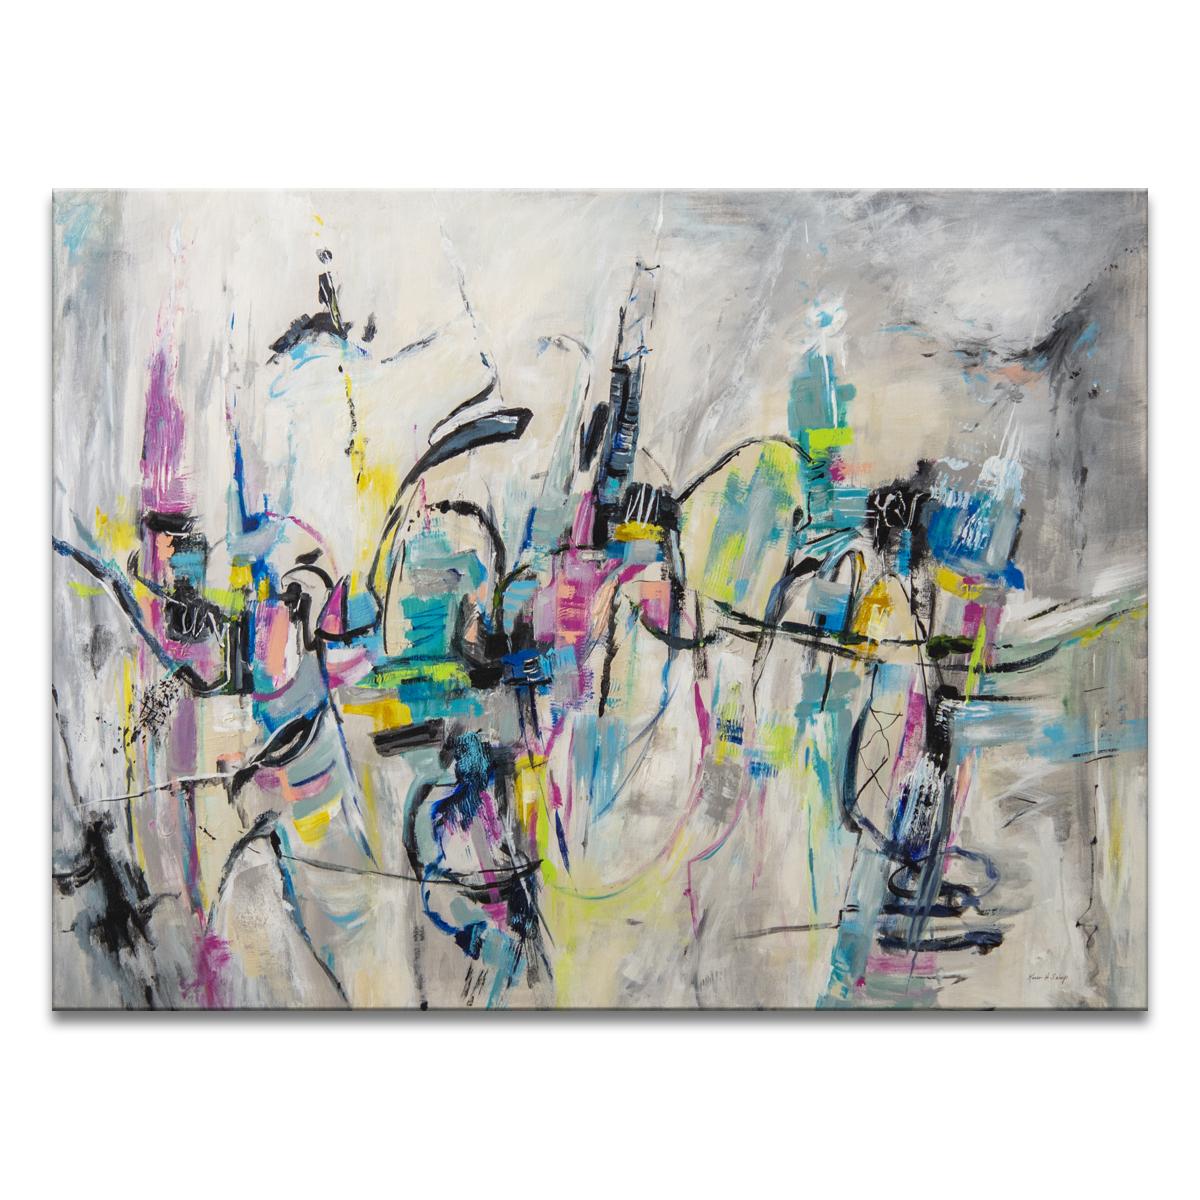 'Cityscape' Wrapped Canvas Original Painting features an energetic abstract aesthetic in vibrant tones of gray, purple, blue, green, yellow, black, blush. Modern divinity expressed on canvas, Karen H. Salup’s work exhibits a multitude of textures